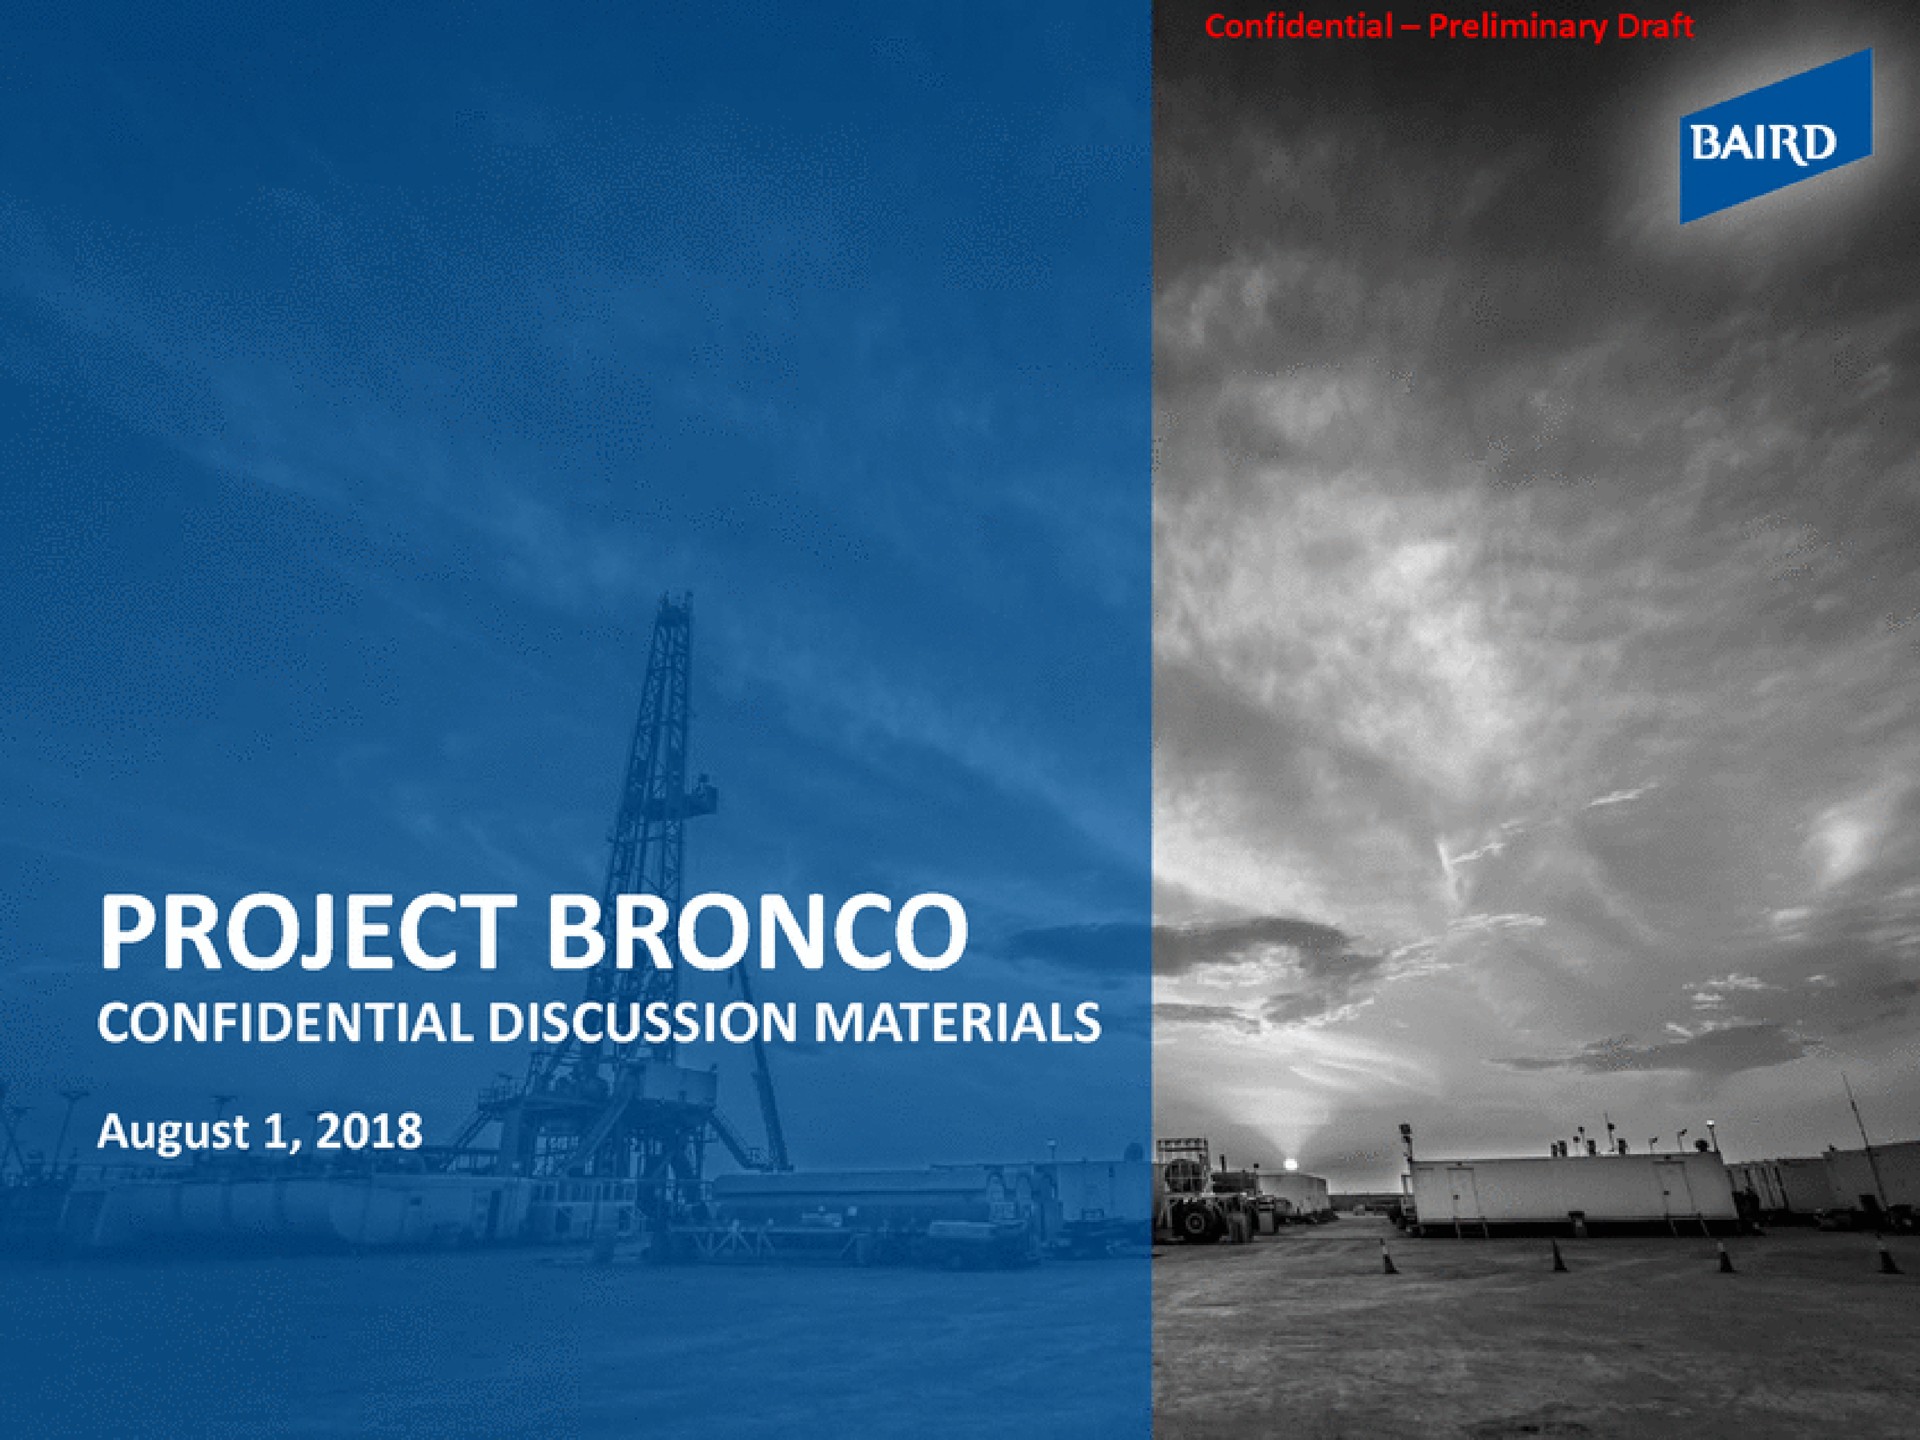 project bronco august confidential discussion materials | Baird